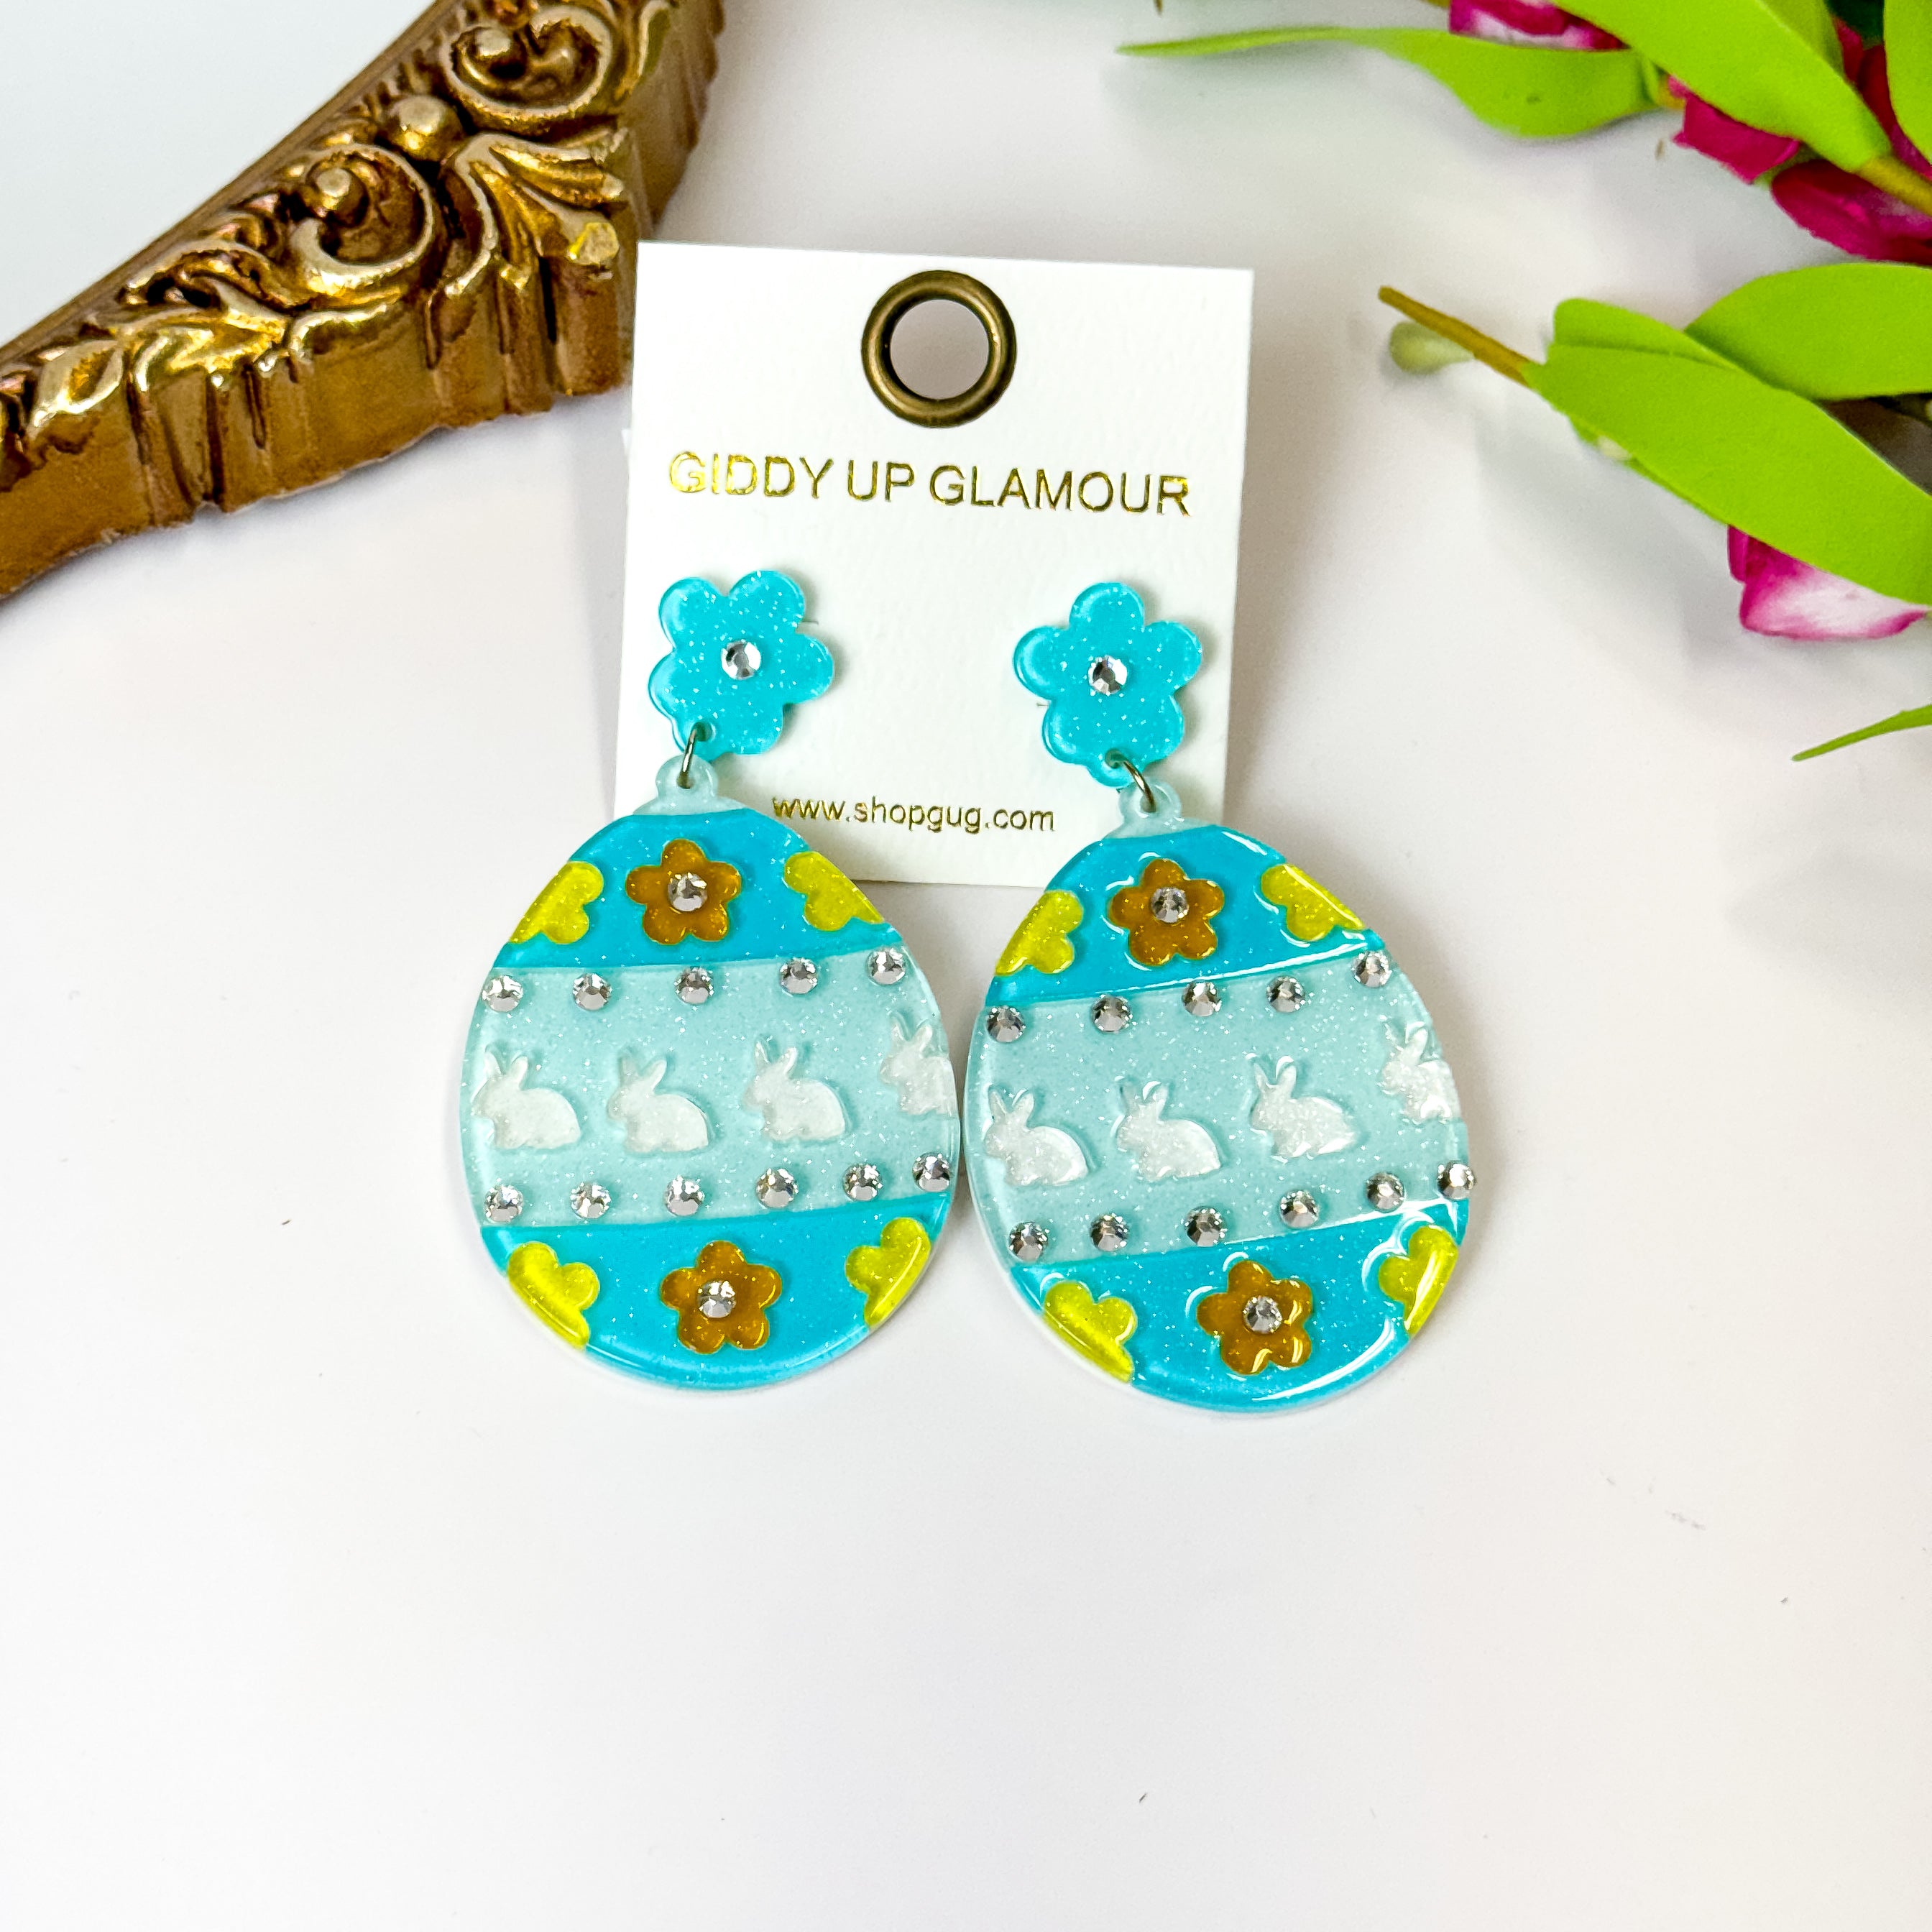 Easter Egg Earrings with Crystals in Turquoise Blue - Giddy Up Glamour Boutique